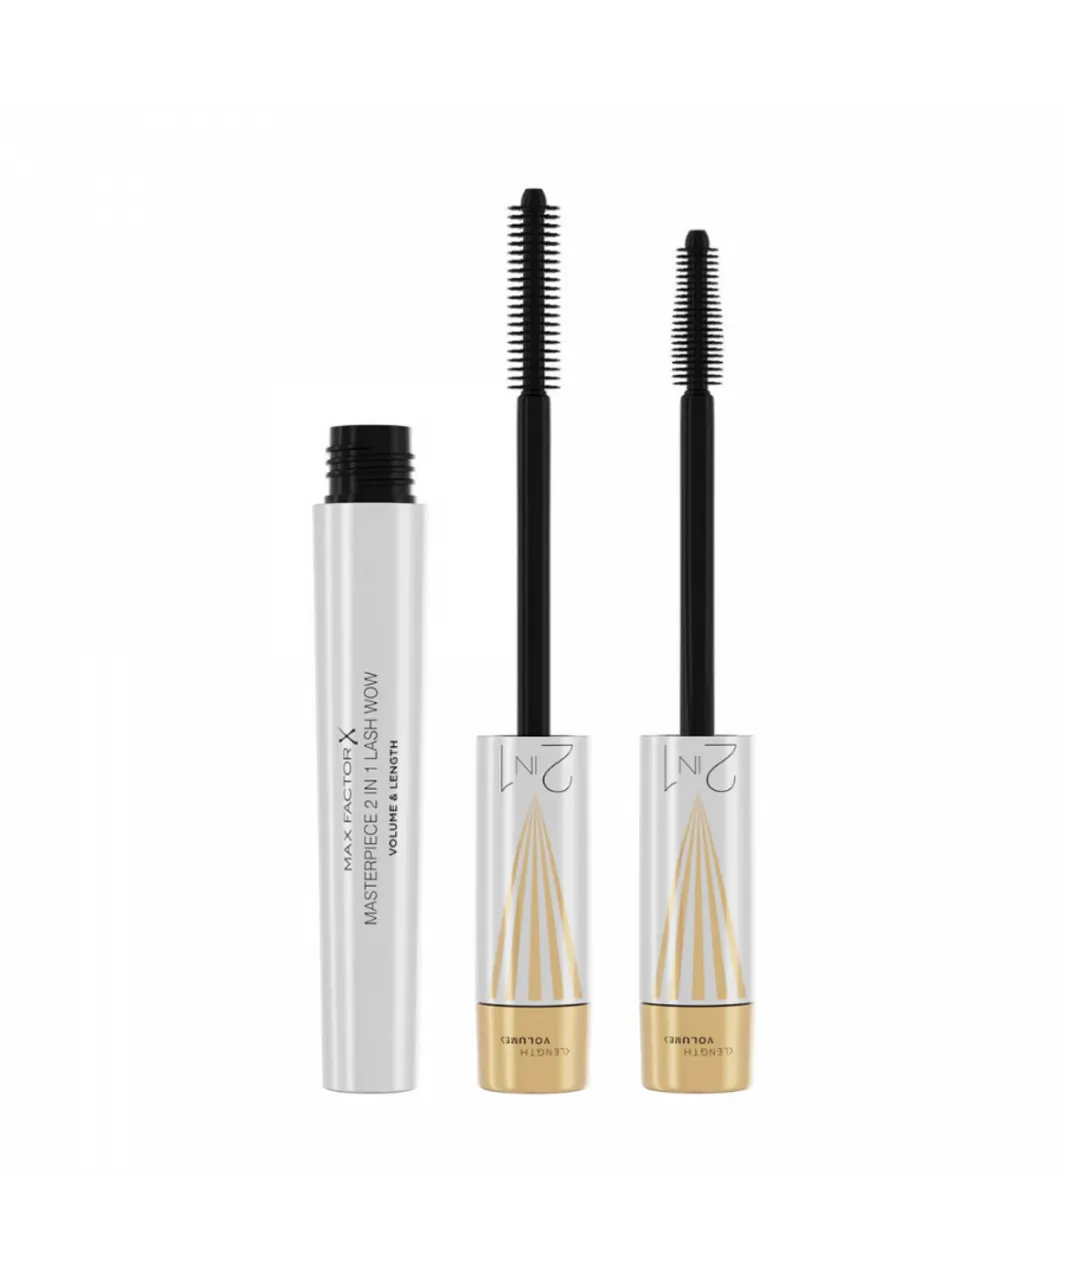 Max Factor Womens Masterpiece 2 in 1 Lash Wow Volume & Length Mascara 7ml - Black - One Size